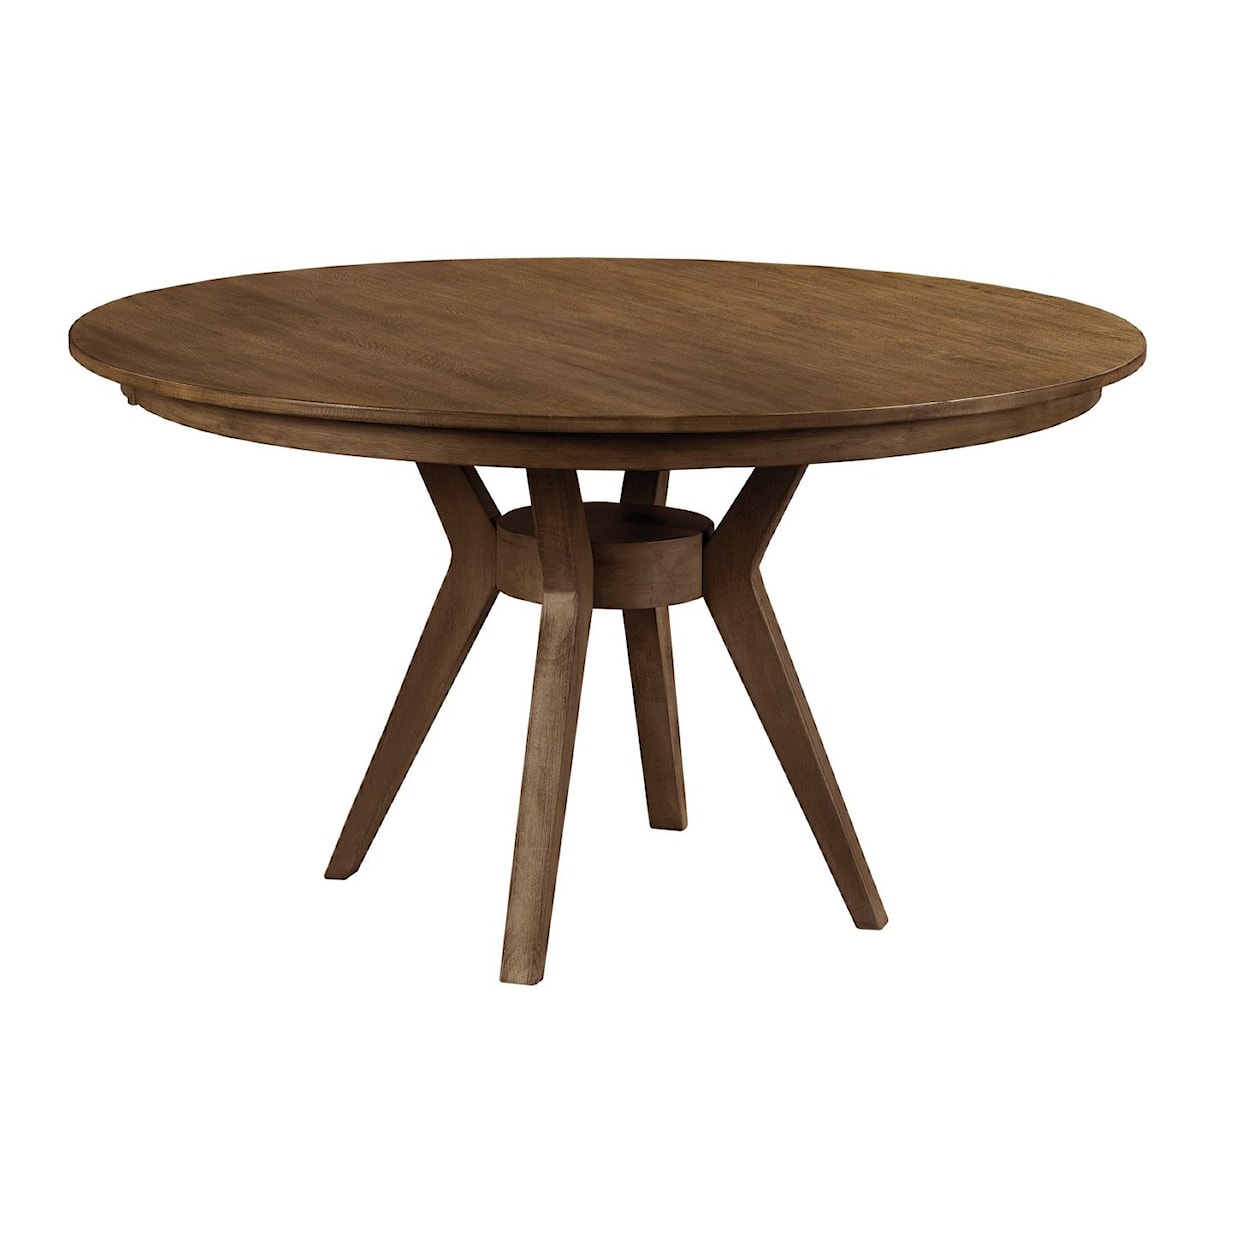 Kincaid Furniture The Nook 44" Round Dining Table with Modern Wood Base